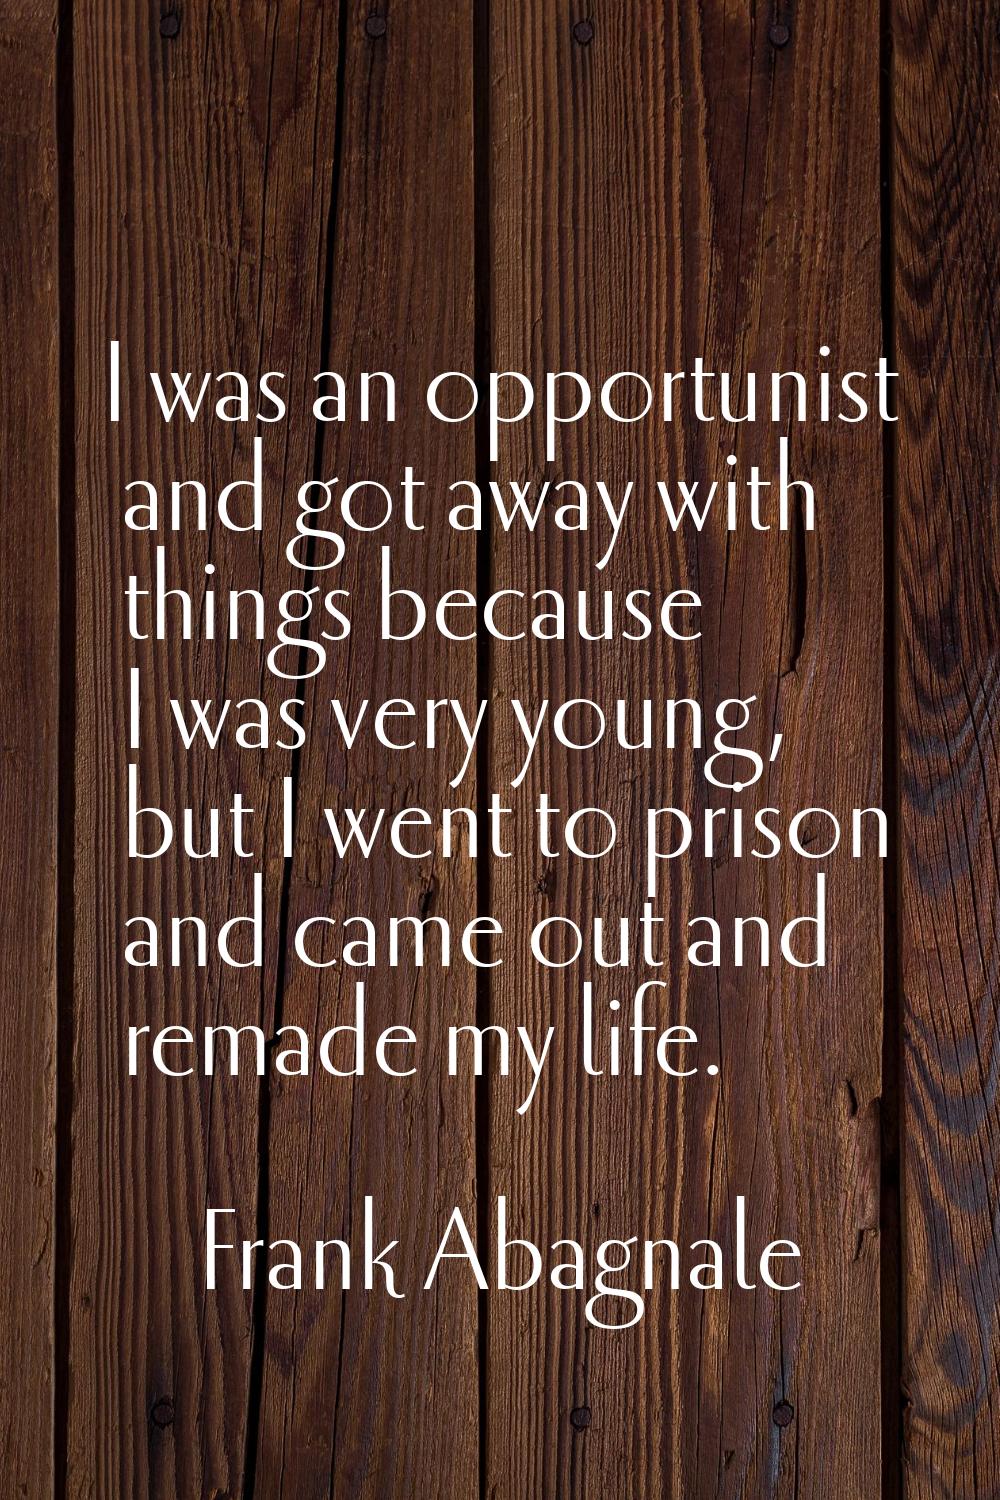 I was an opportunist and got away with things because I was very young, but I went to prison and ca